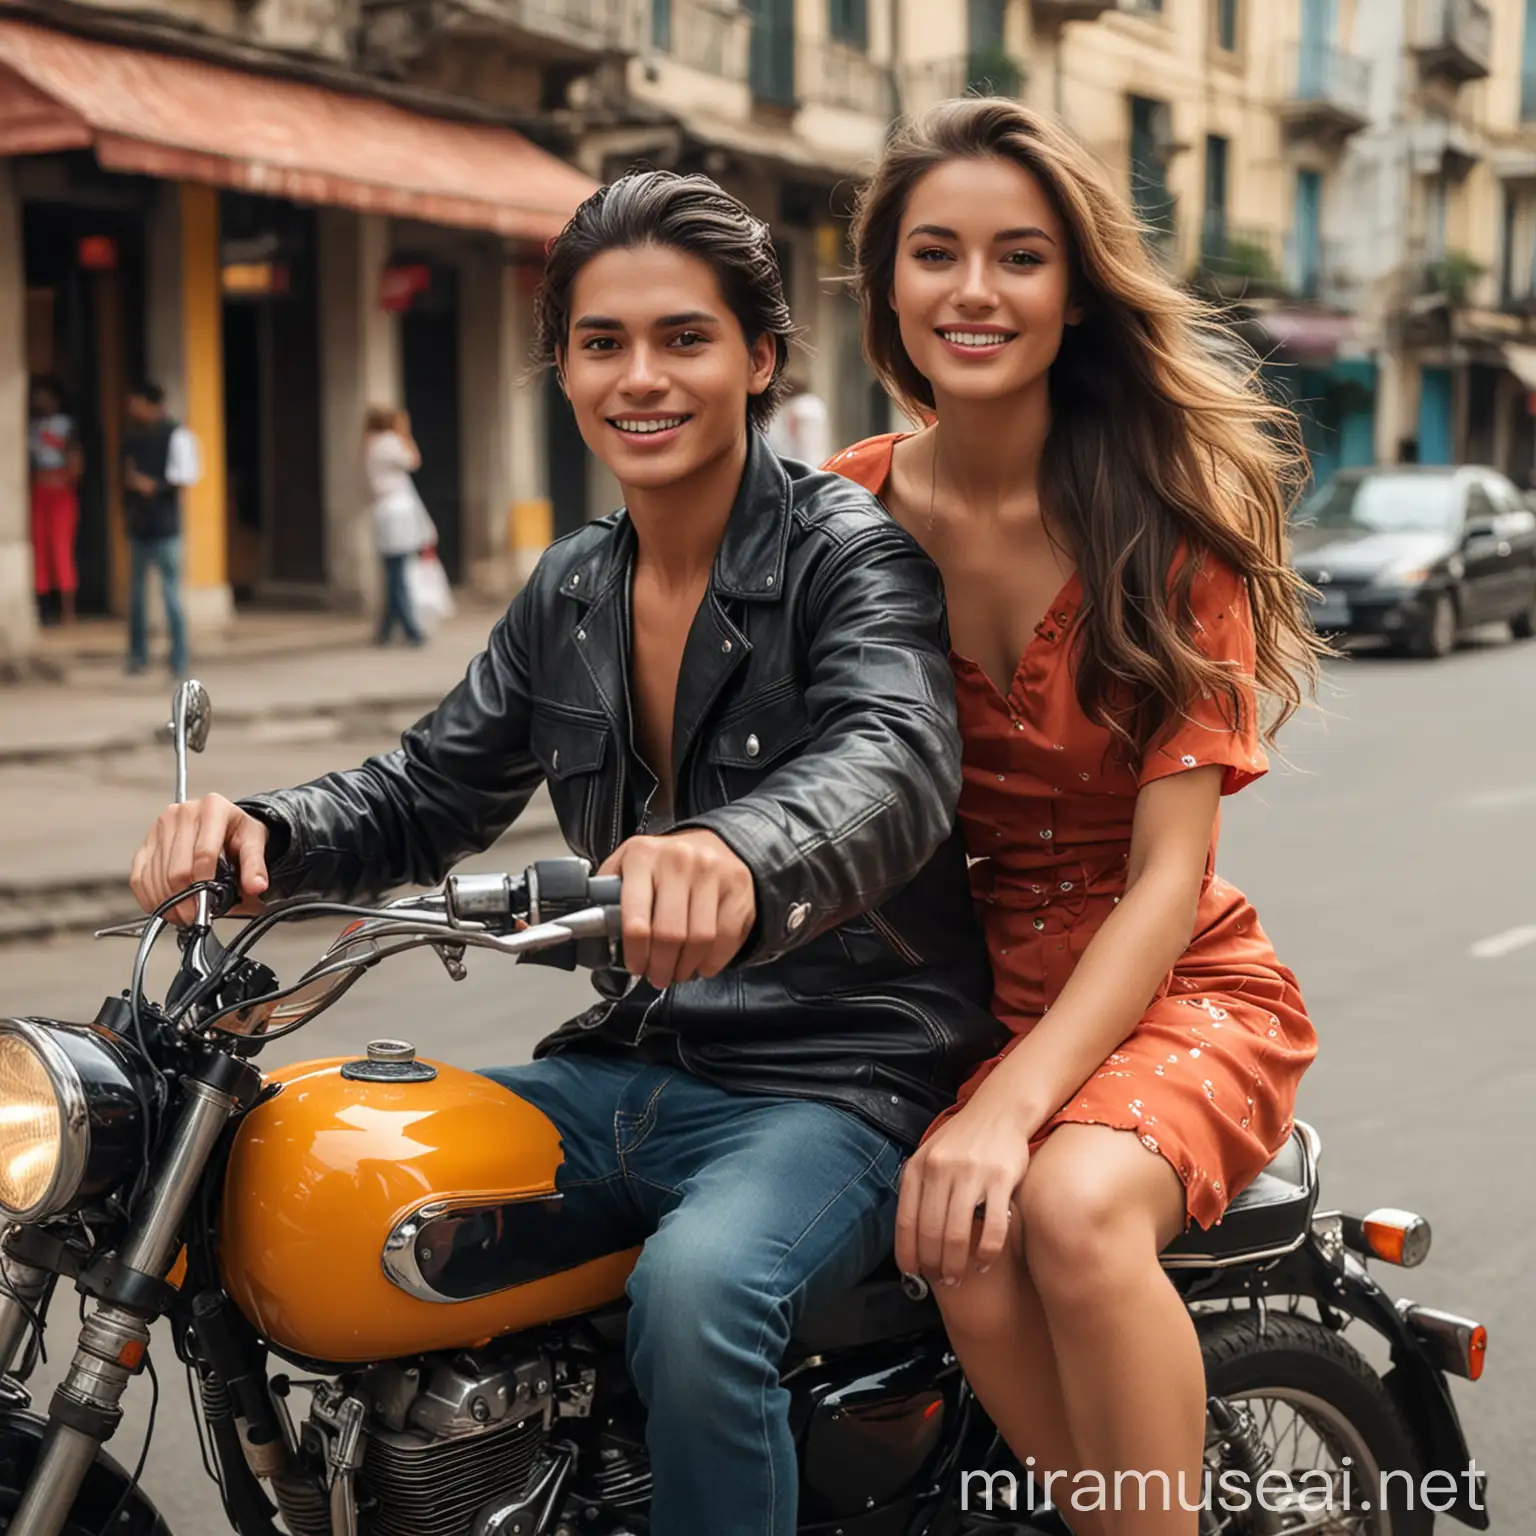 A motorbike taxi driver gives a ride to a beautiful and fashionable woman